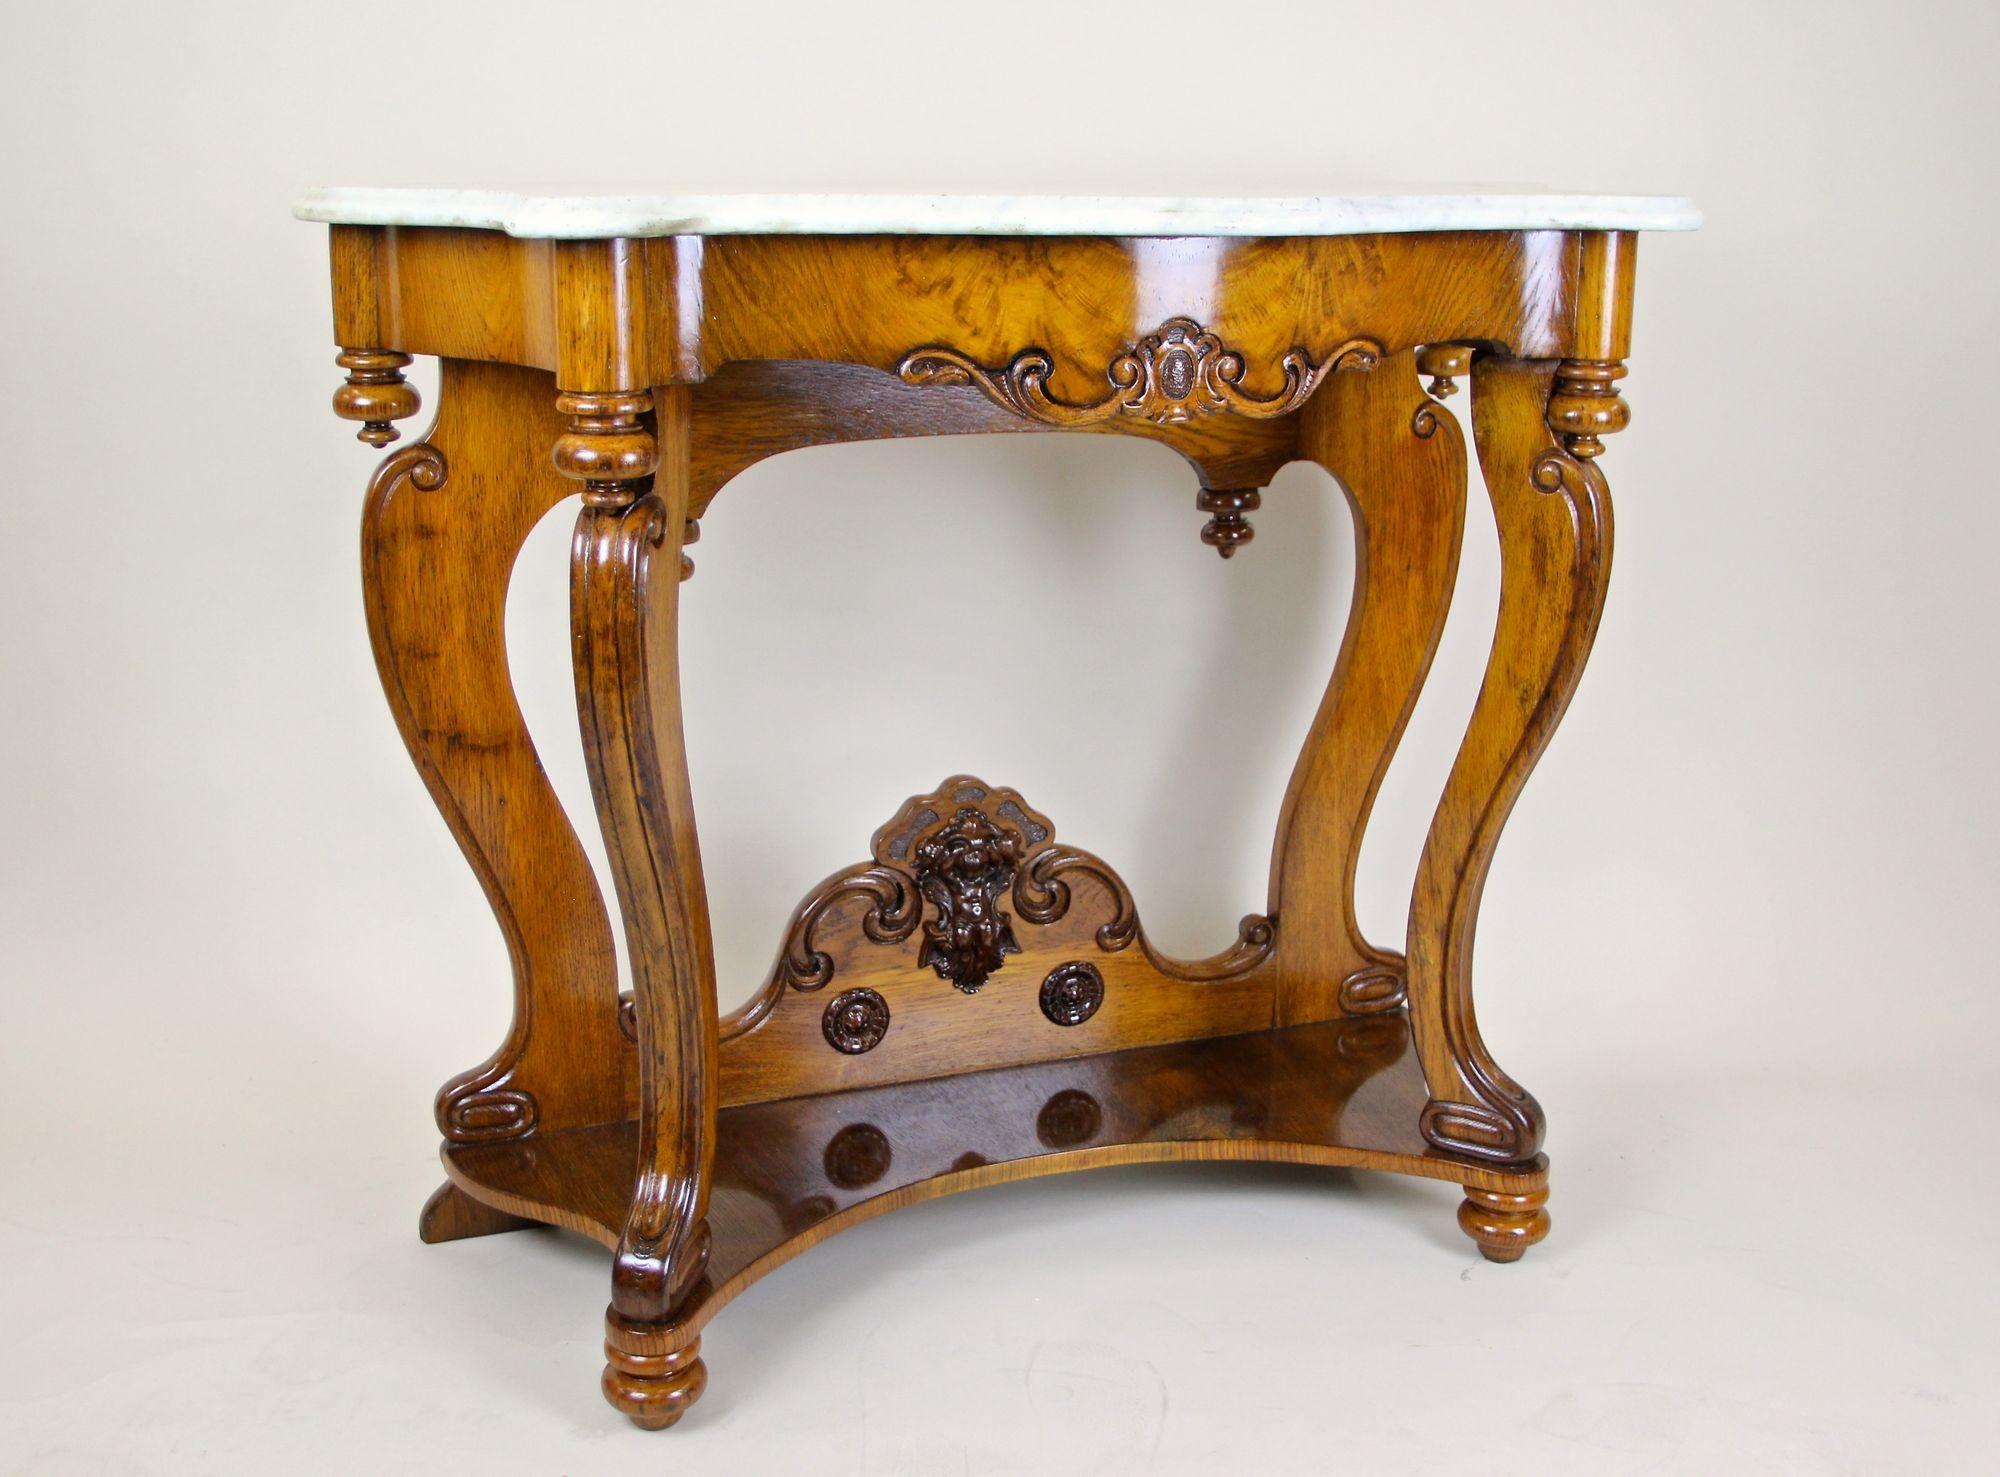 Artfully crafted 19th century oakwood console table with beautiful white/ grey carrara marble plate from the famous Louis Philippe period in France around 1850. Elaborately handcarved out of fine oakwood - partly solid/ partly veneered - this